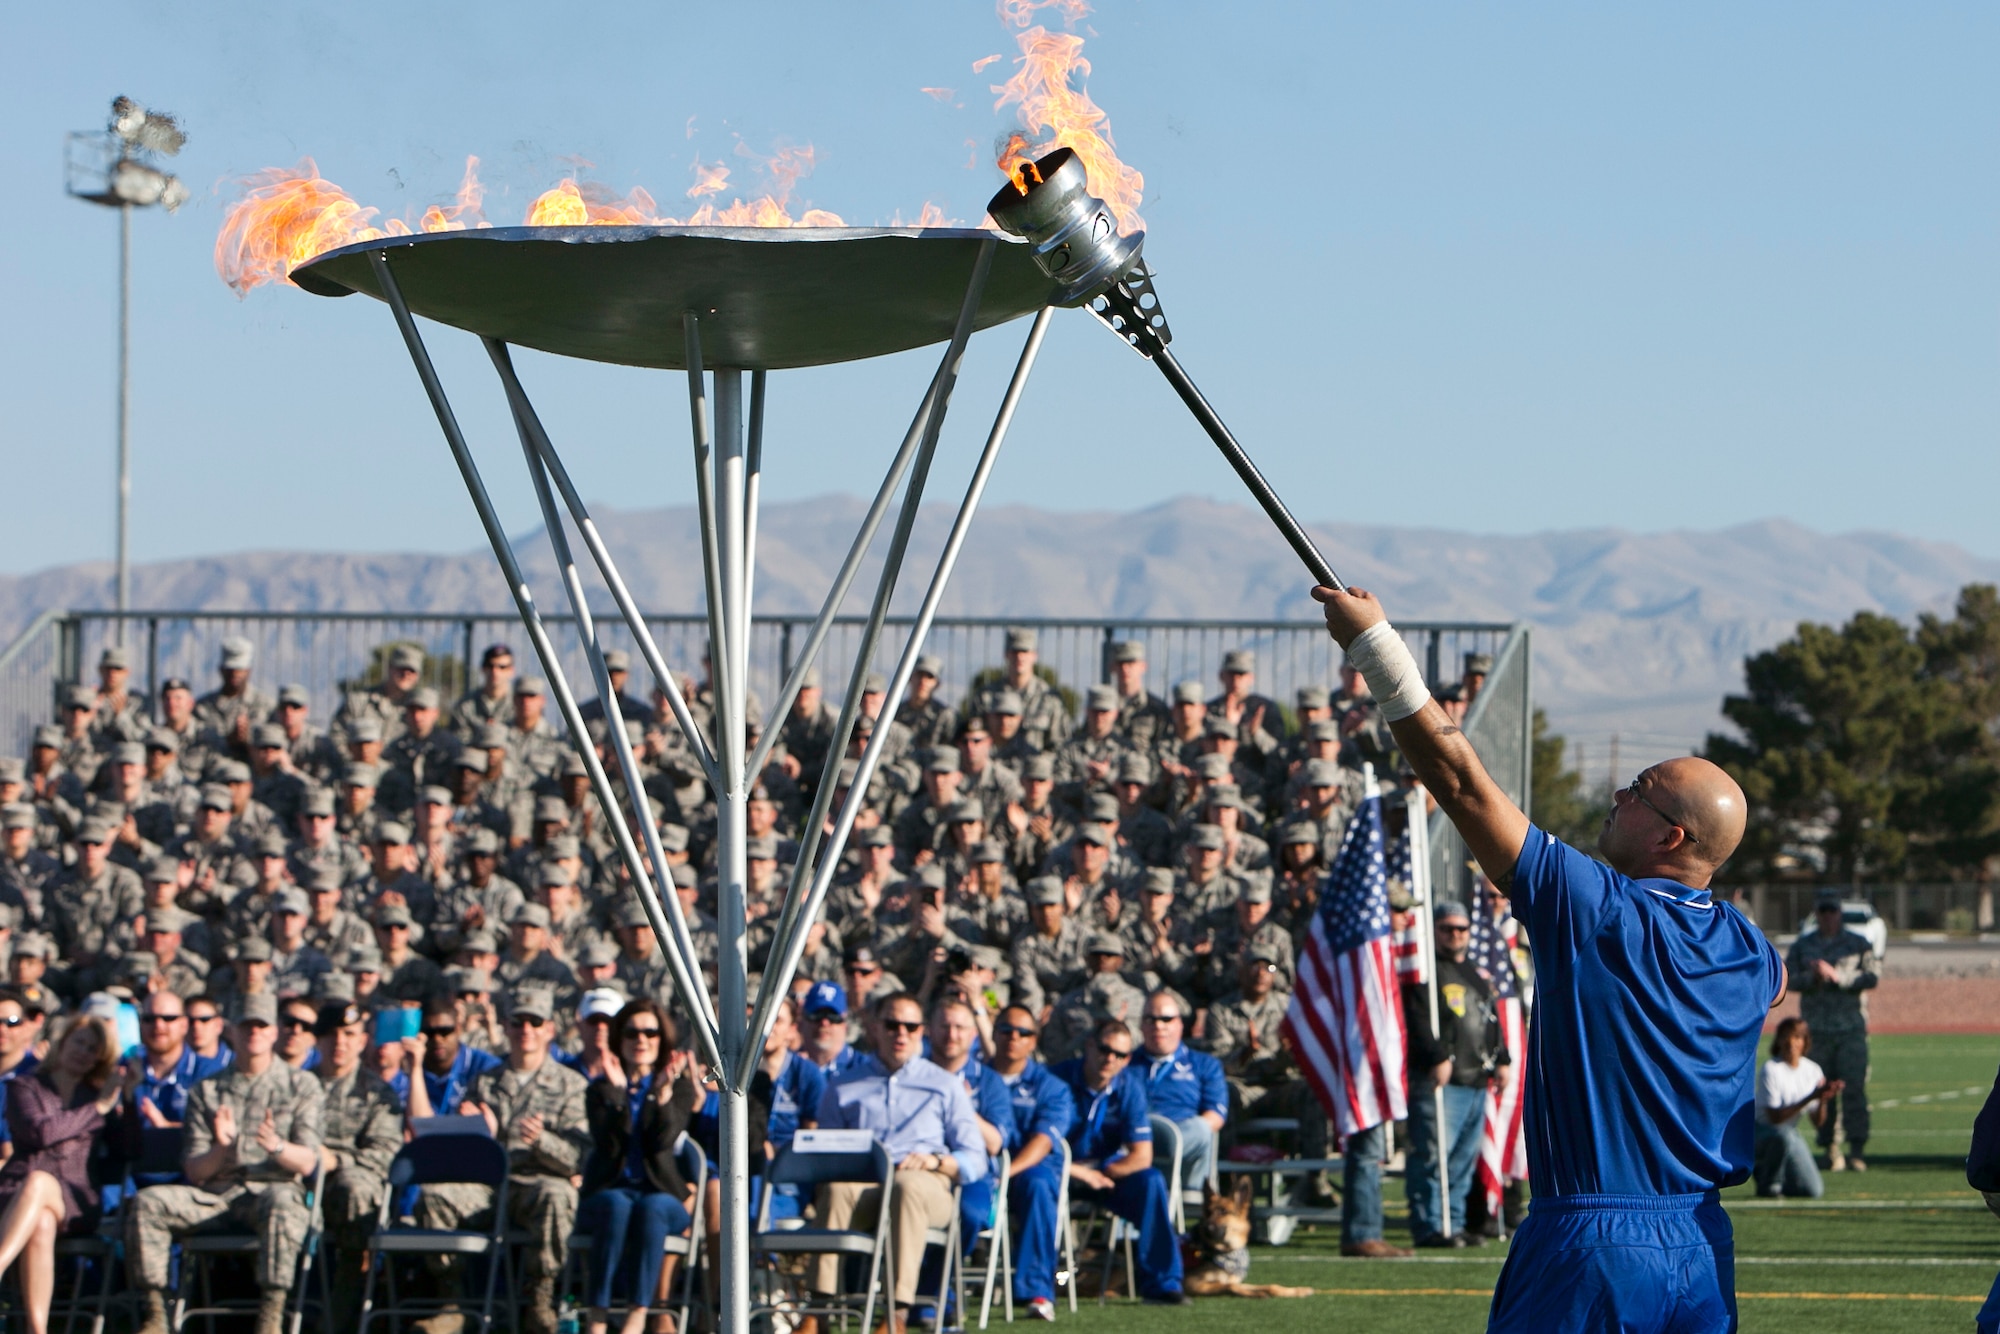 Master Sgt. Christopher Aguilera lights the cauldron signifying the beginning of the Air Force Wounded Warrior Trails April 7, 2014, at Nellis Air Force Base, Nev. Aguilera, who is a survivor of the June 9, 2010 “Pedro 66” helicopter crash in southwest Afghanistan, will participate in in seven events during the trials. (U.S. Air Force photo/Lorenz Crespo)
